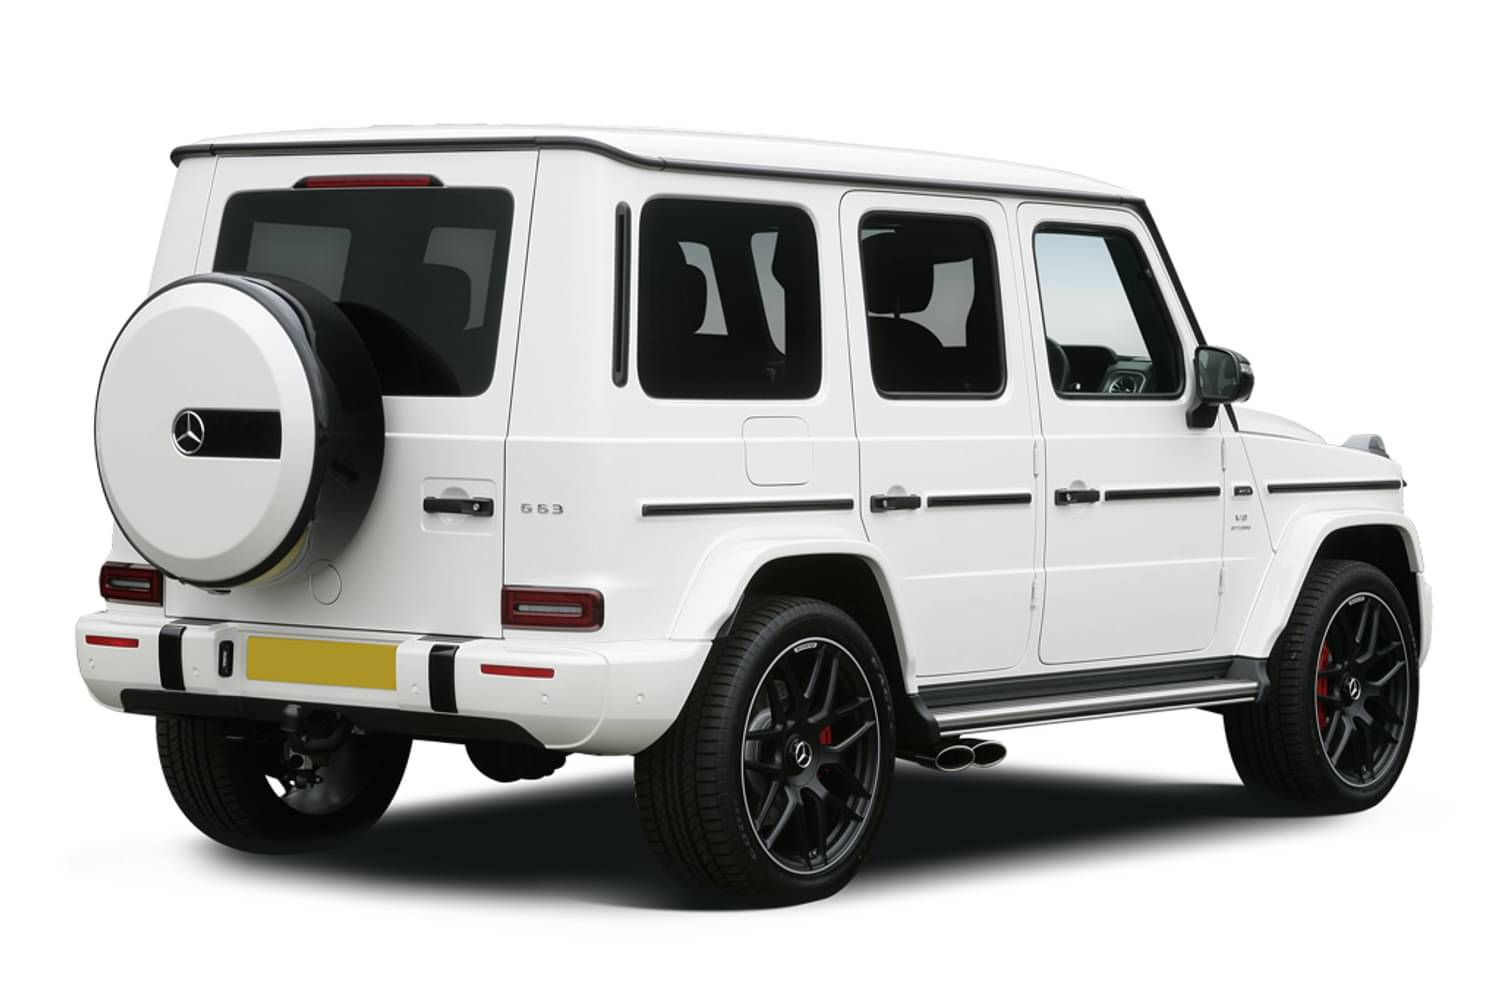 New Mercedes Benz G Class Amg Station Wagon G63 5 Door 9g Tronic 18 For Sale